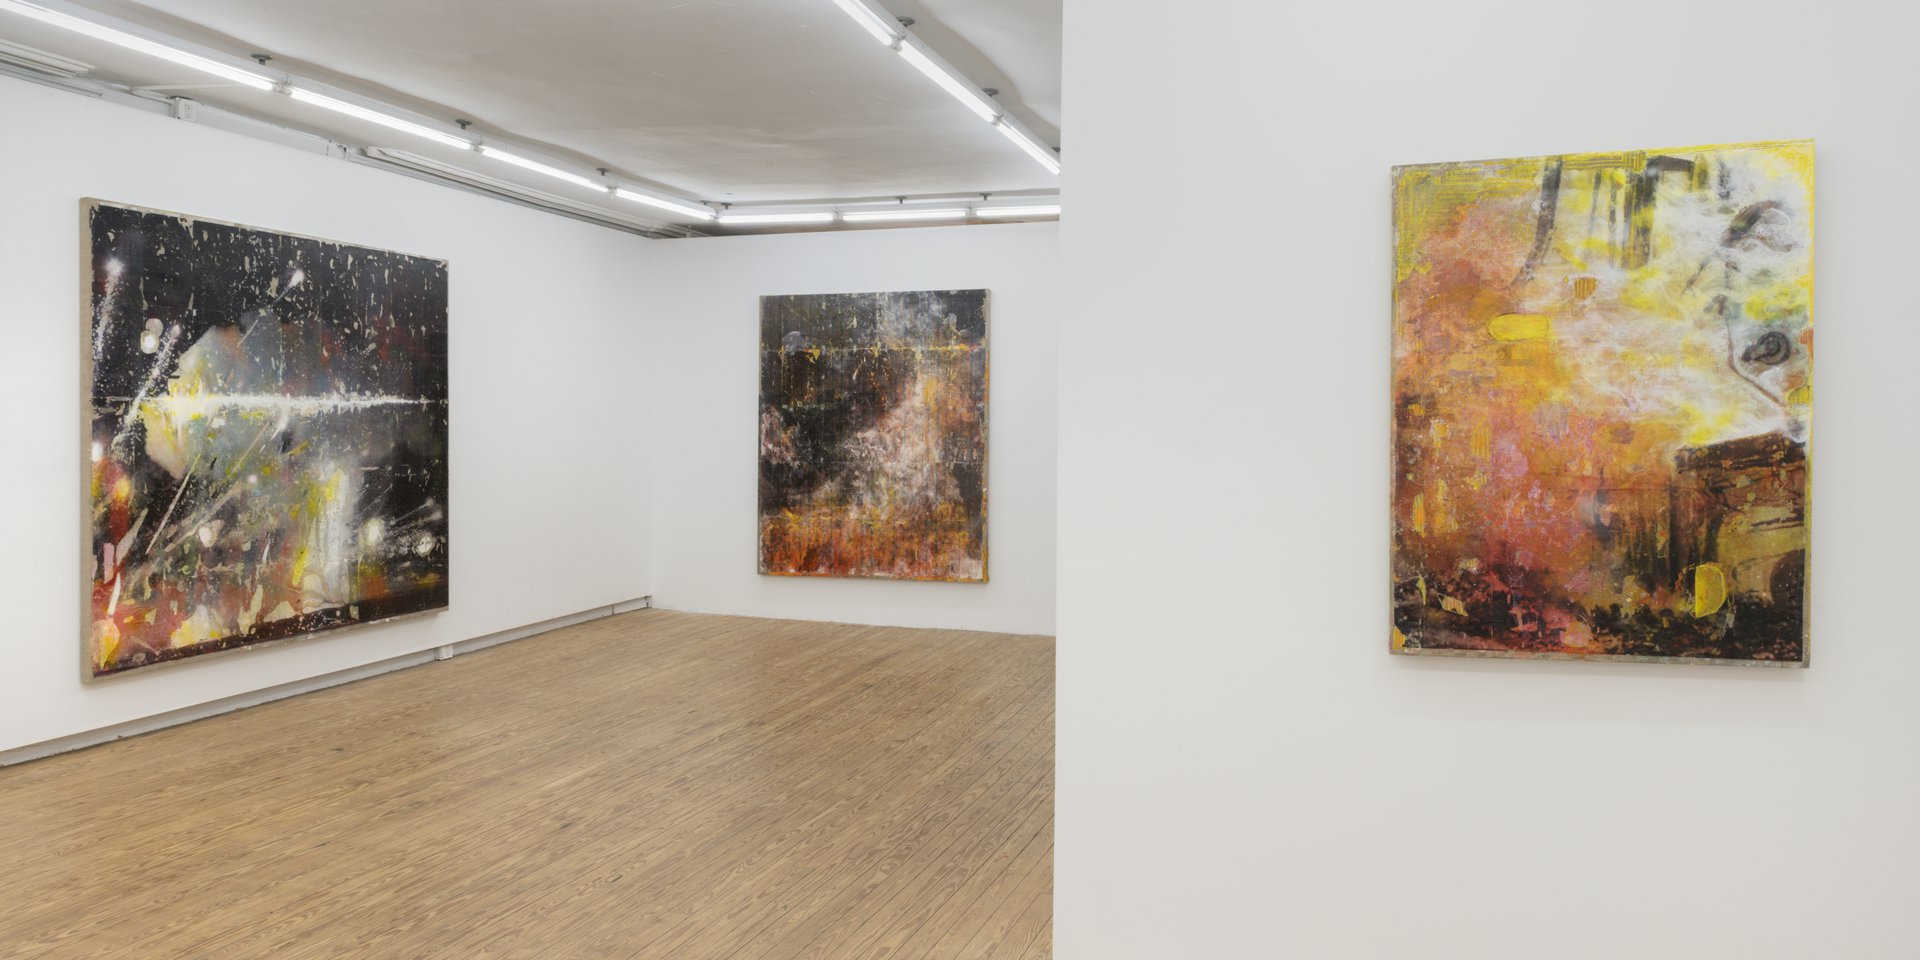 Public Secret, installation shot.Solo exhibition at Helena Anrather Gallery, New York, 2020.Courtesy of the artist and Helena Anrather Gallery.